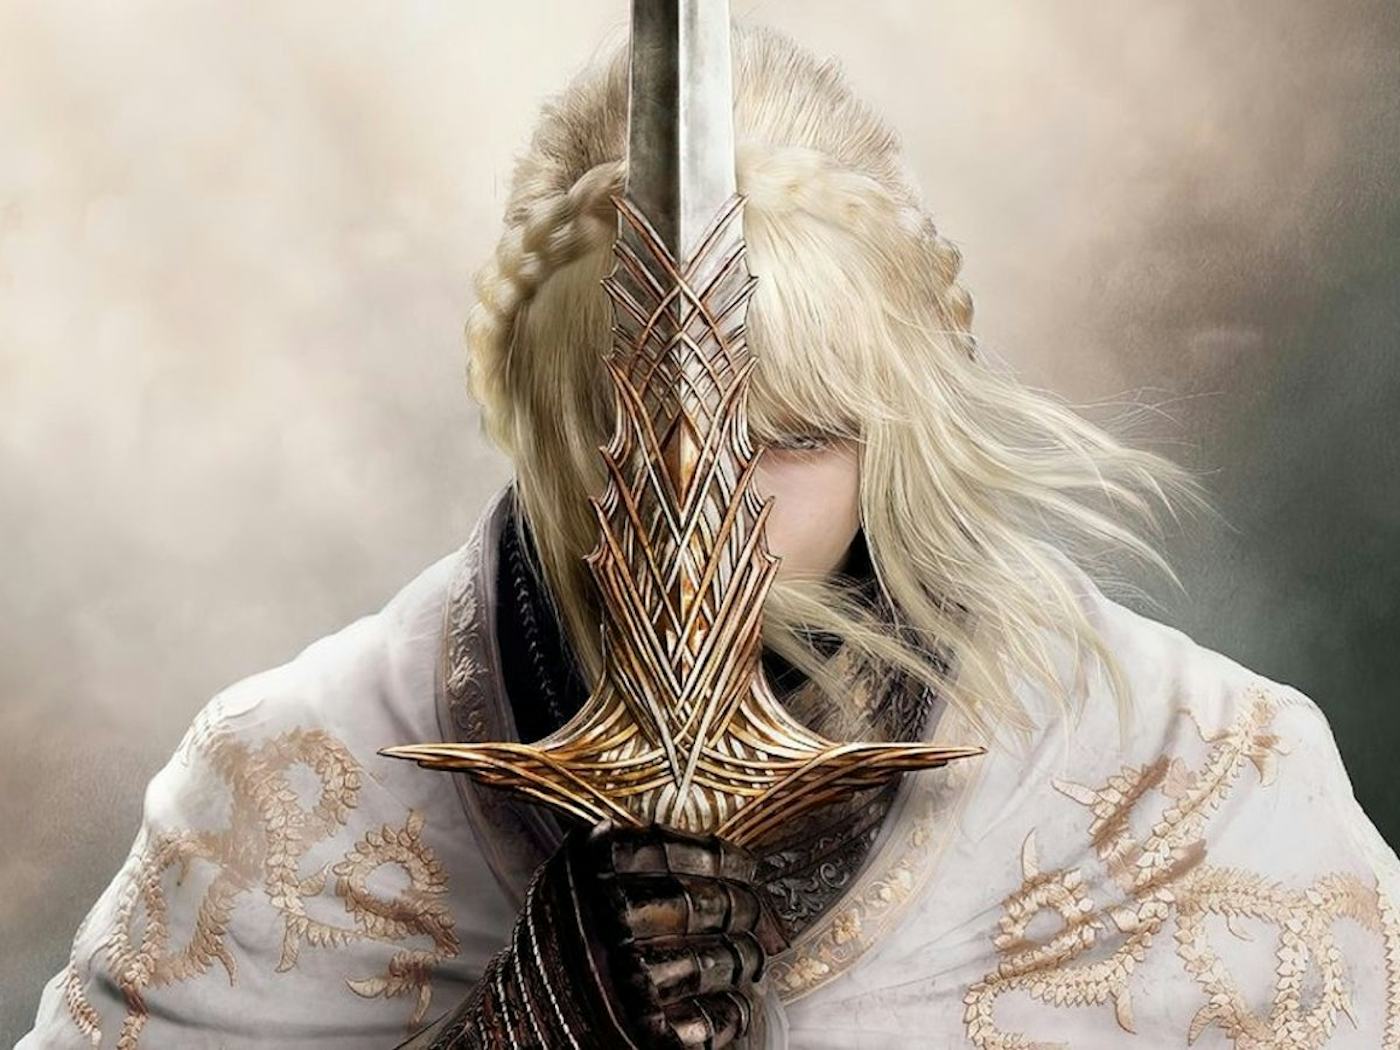 Blonde-haired female warrior in an ornate cloak, holding a sword vertically in front of her face, obscured by the blade and guard.